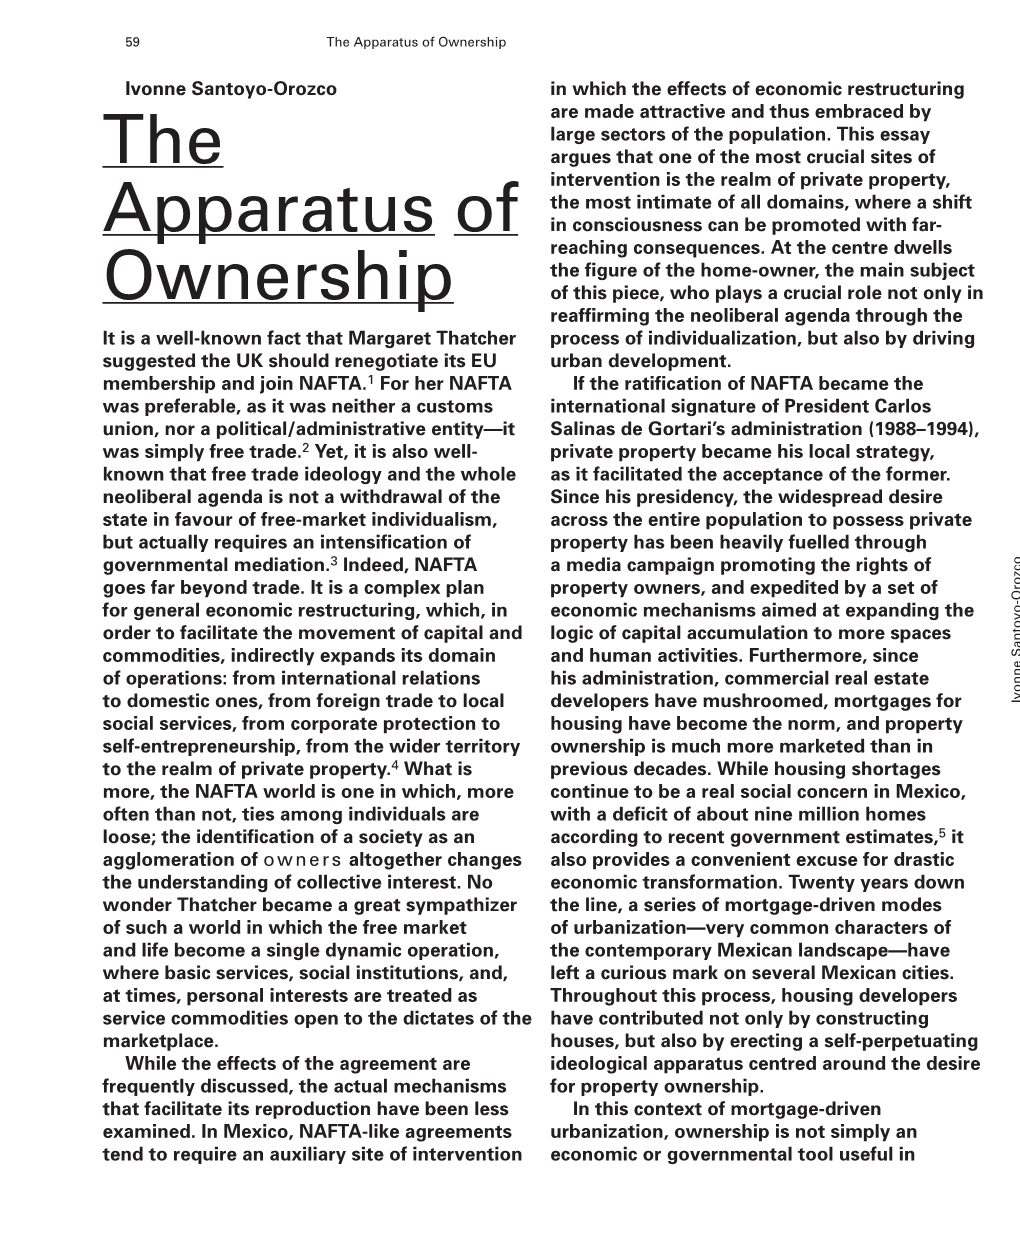 The Apparatus of Ownership